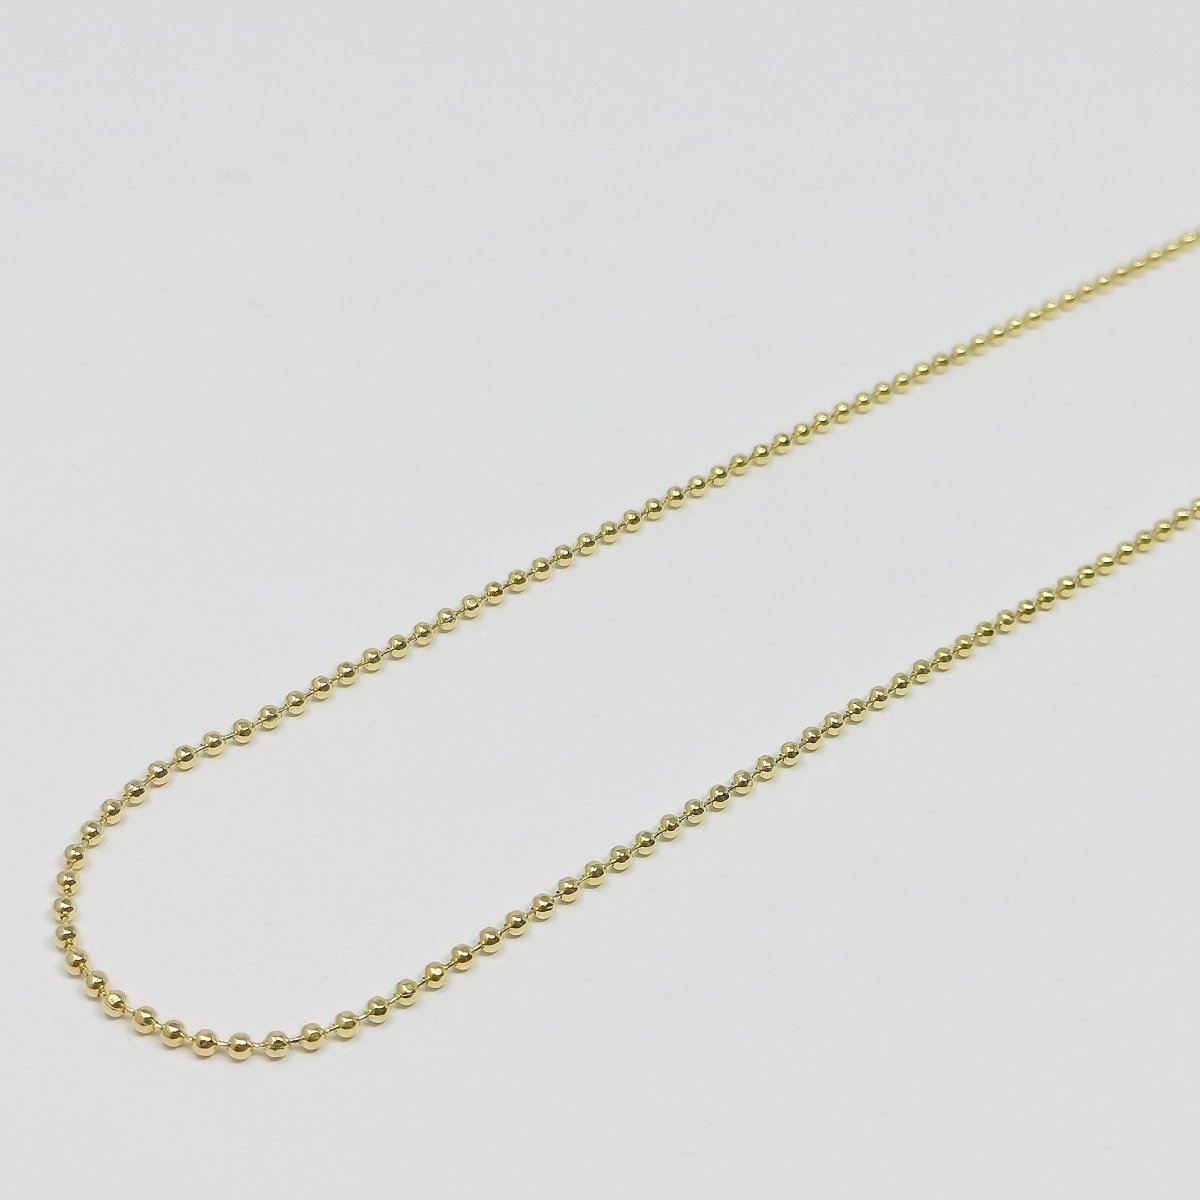 1.8mm Ball Beads, Gold Chain By Yard, Round Beads Chain For DIY Jewelry Making Craft, Necklace Bracelet Anklet Supply Component | ROLL-364 Clearance Pricing - DLUXCA